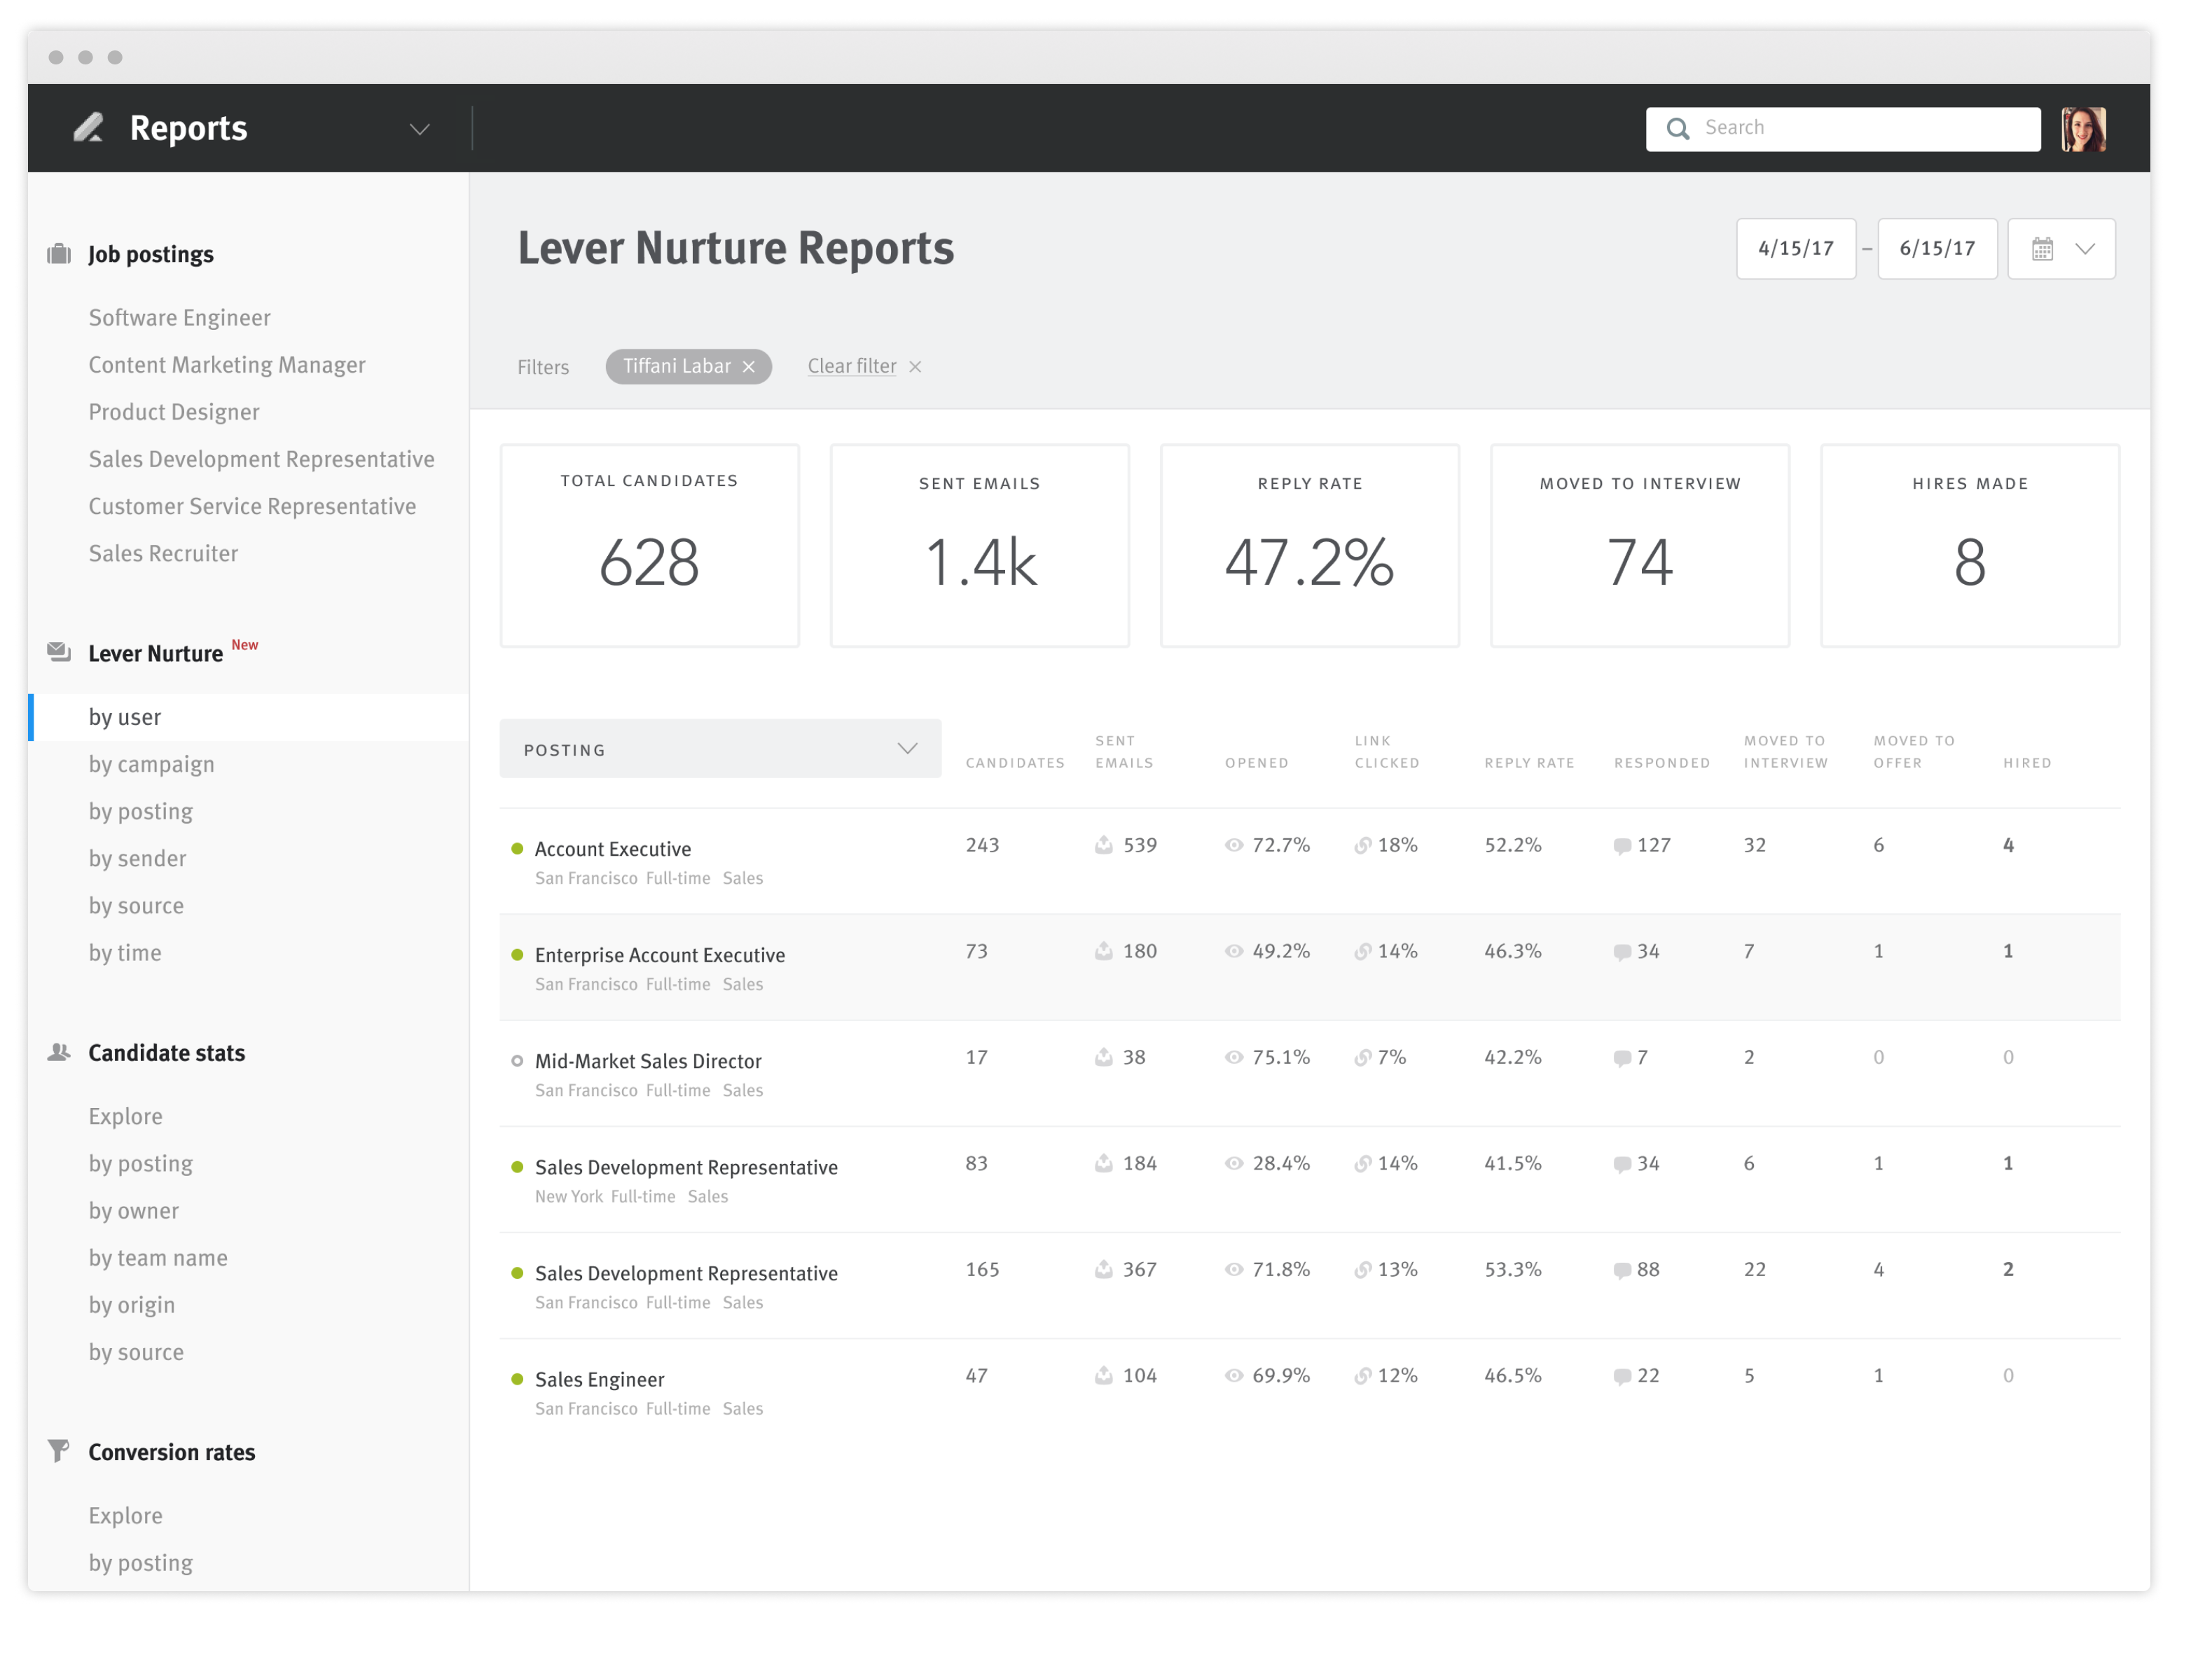 Nuture by user report showing Nurture campaign performance for each of the users postings.